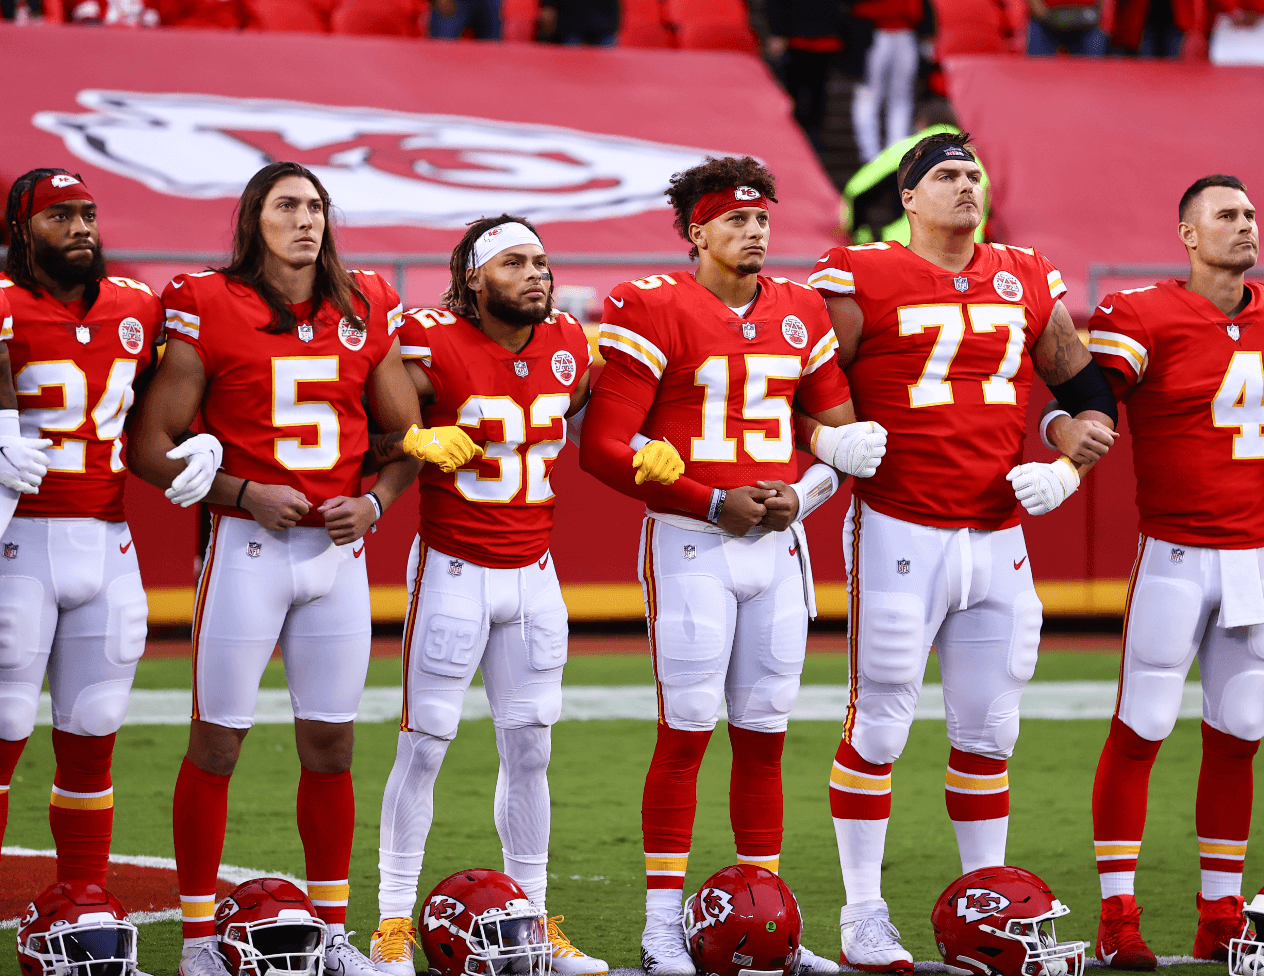 Kansas City Chiefs players stand arm-in-arm during a social justice demonstration ahead of their NFL football game against the Houston Texans on Sept. 10, 2020. Players pictured are Chad Henne, Andrew Wylie, Patrick Mahomes, Tyrann Mathieu, Tommy Townsend and former safety Tedric Thompson.